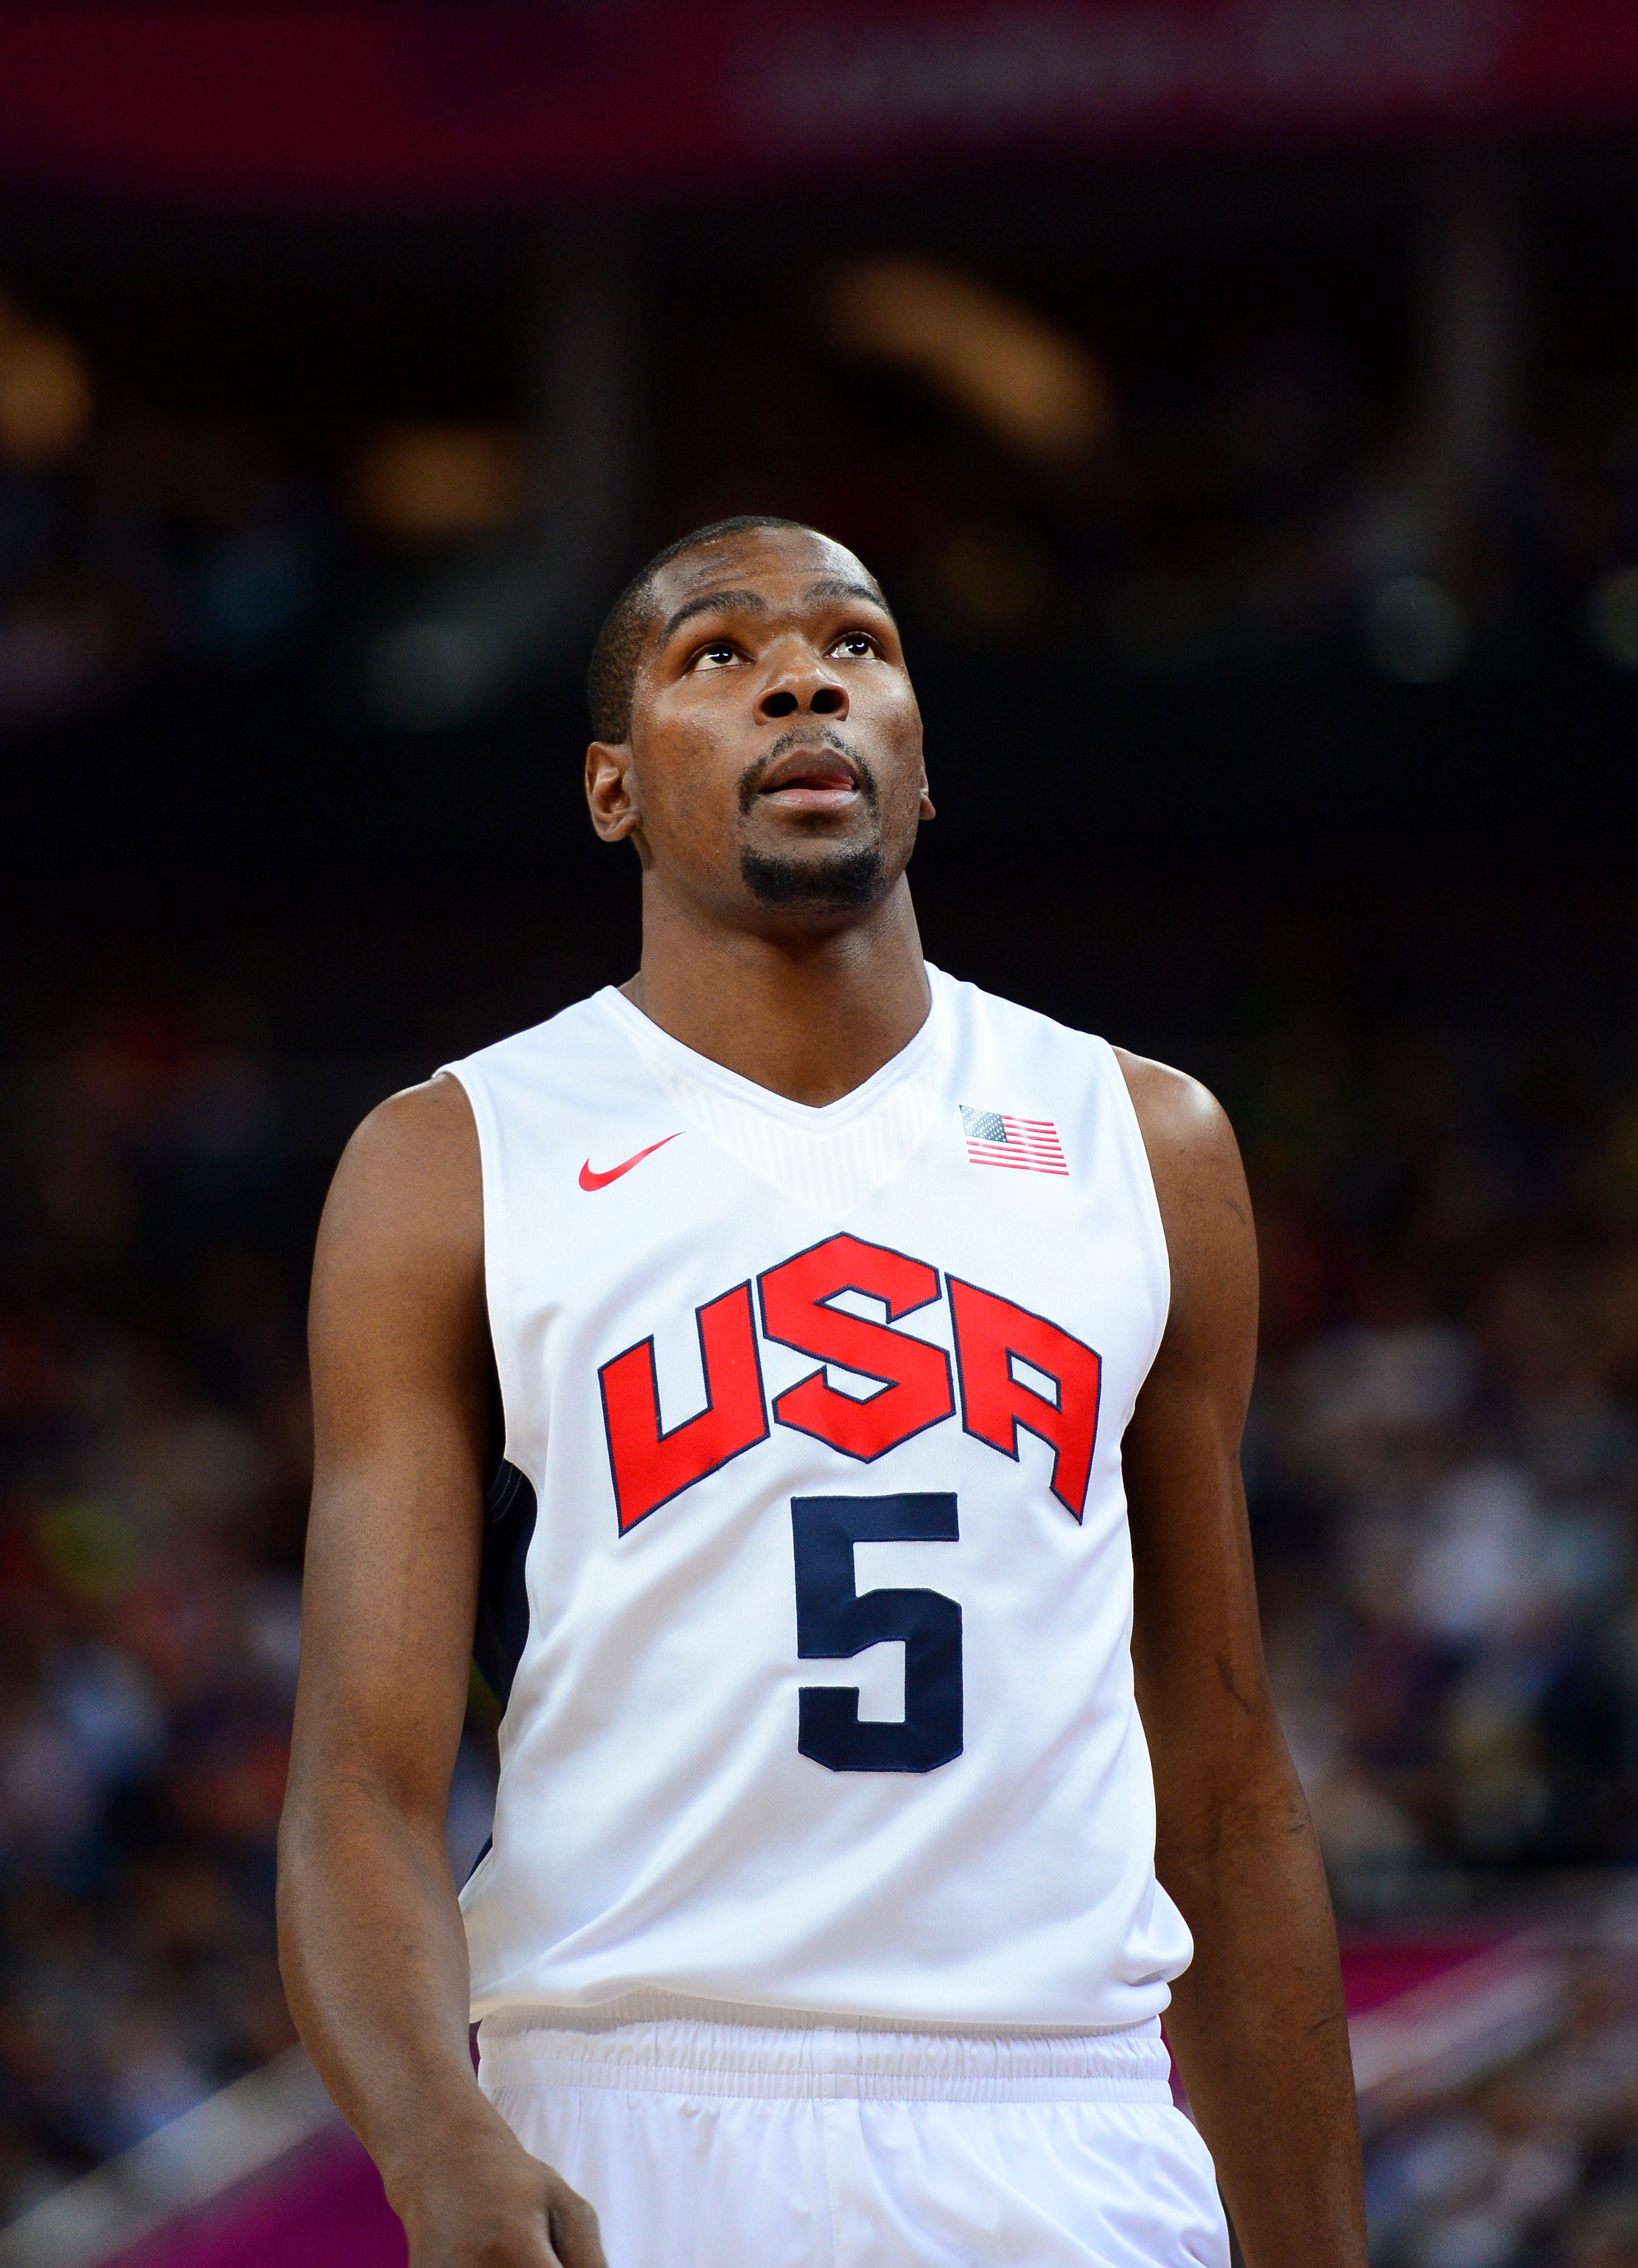 durant usa jersey